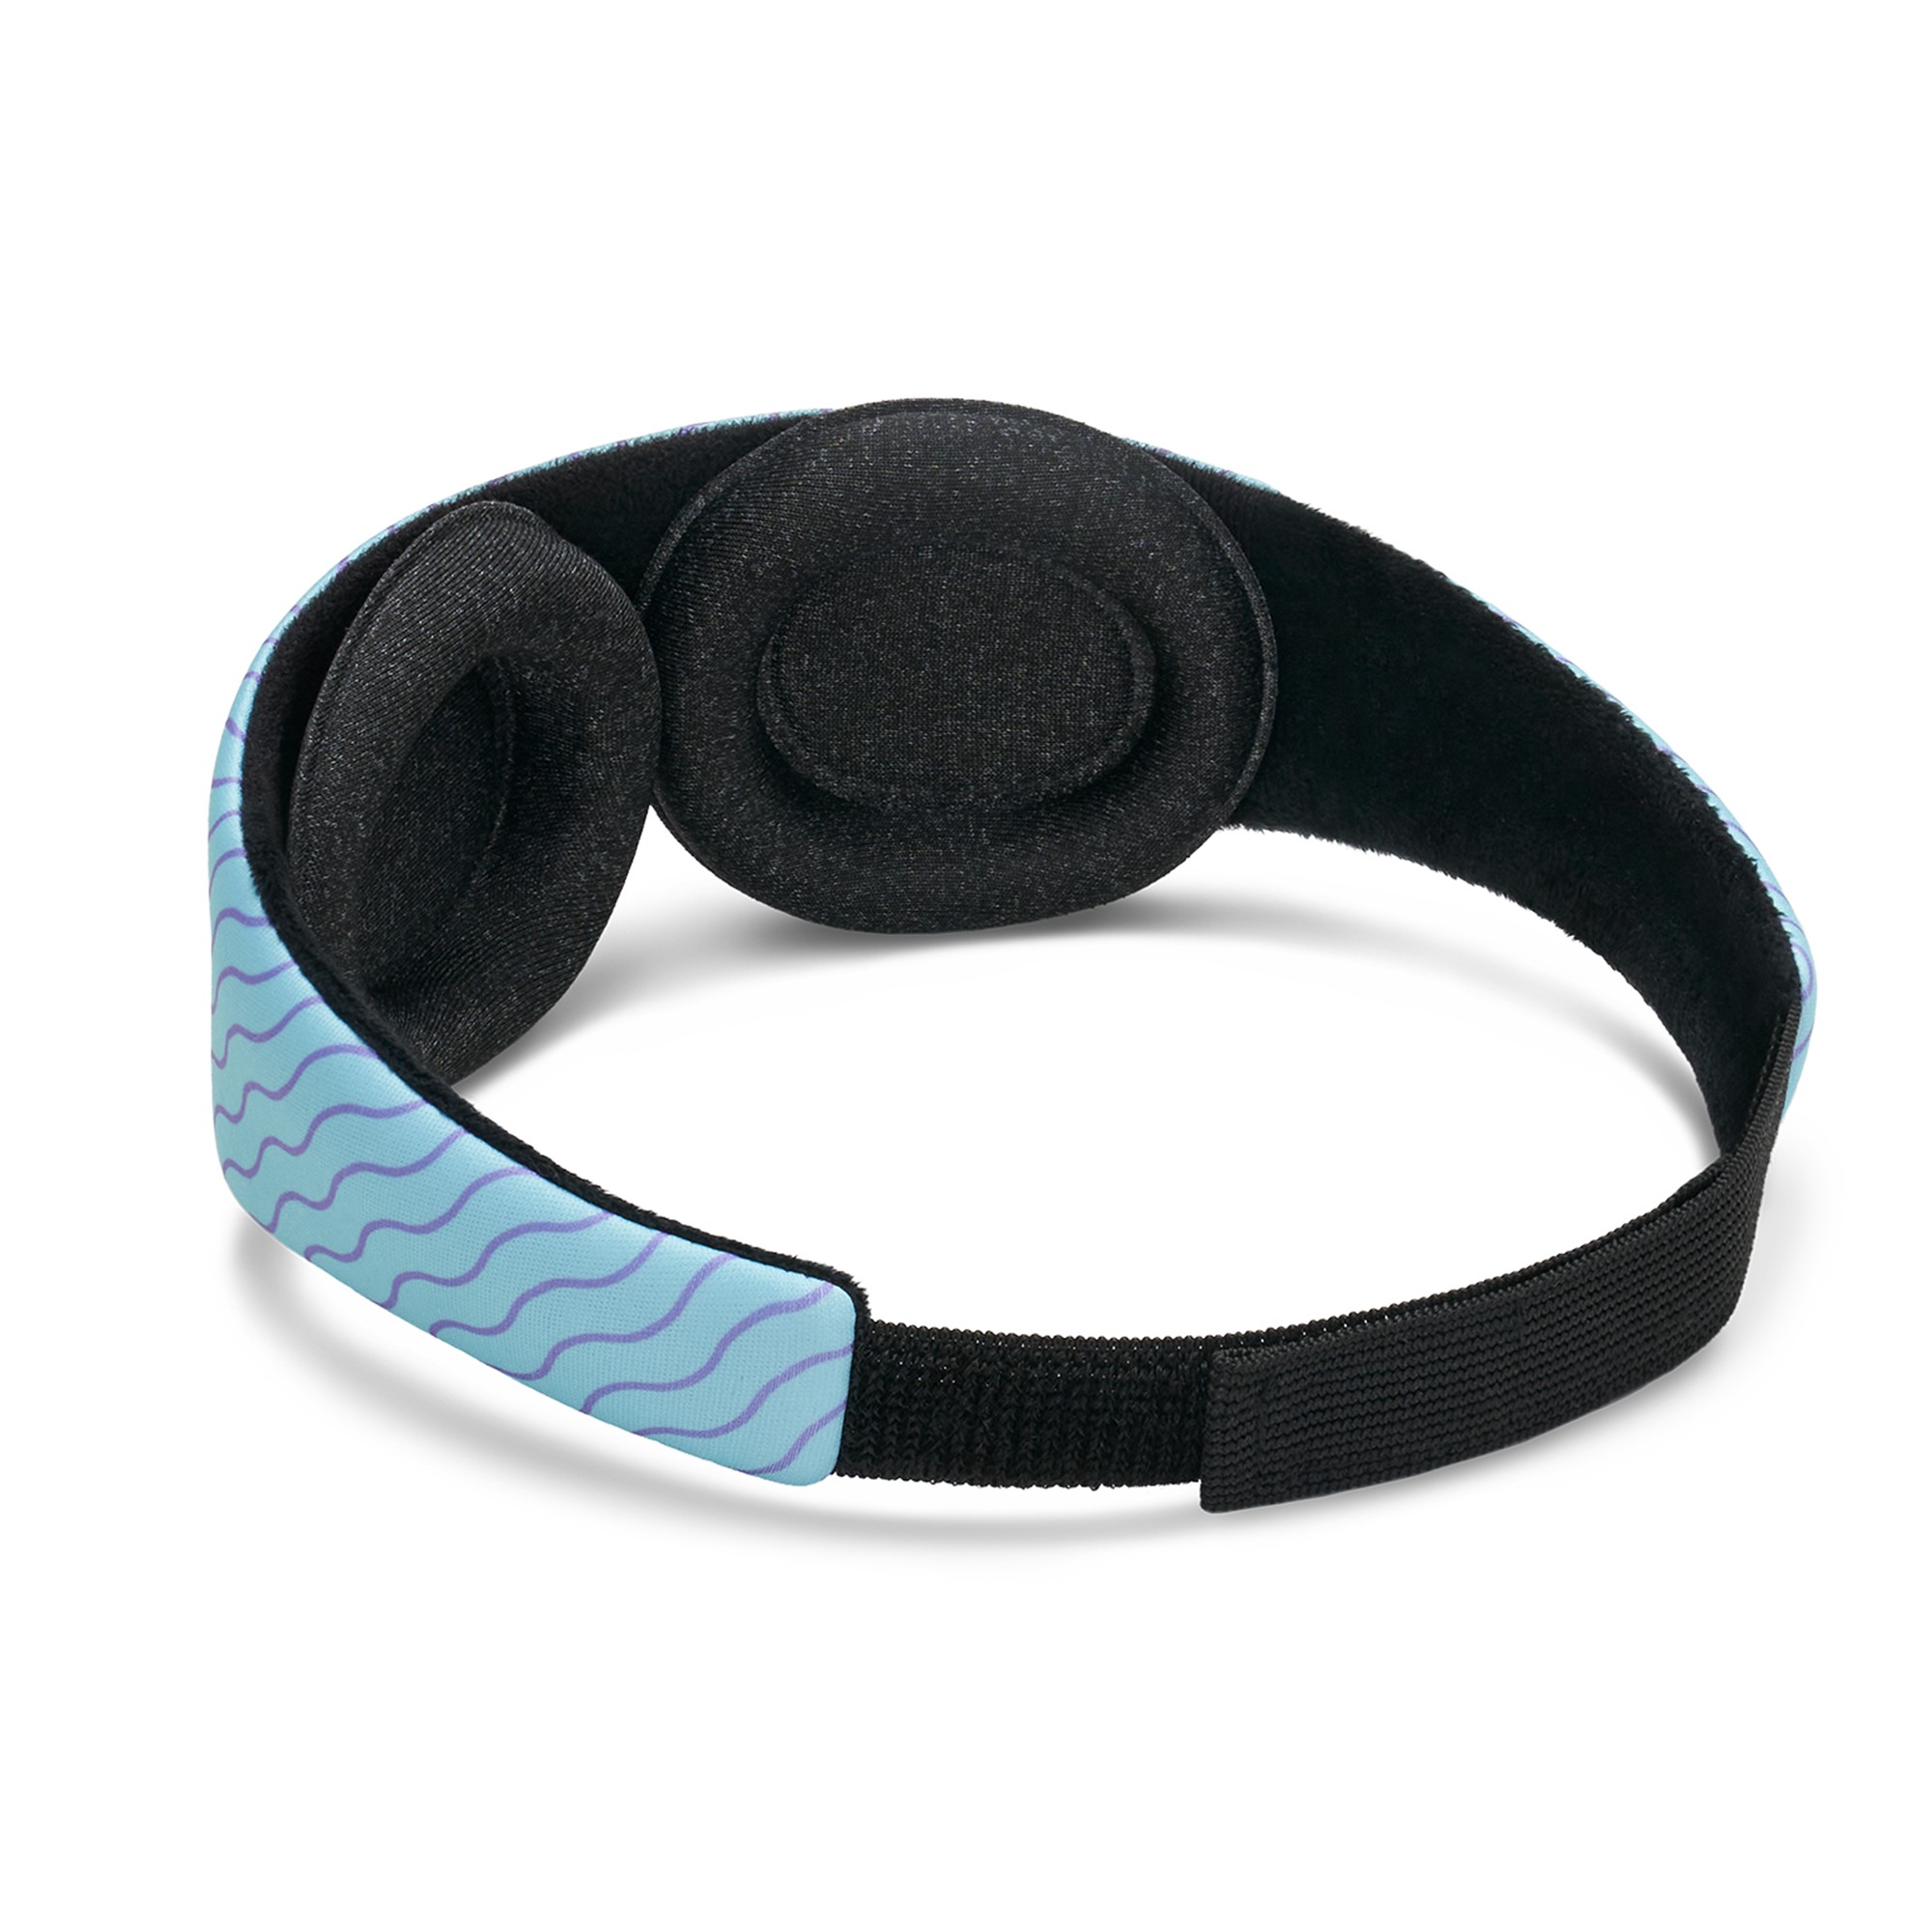 The interior of a blue sleep mask for boys with two detachable eye cups.